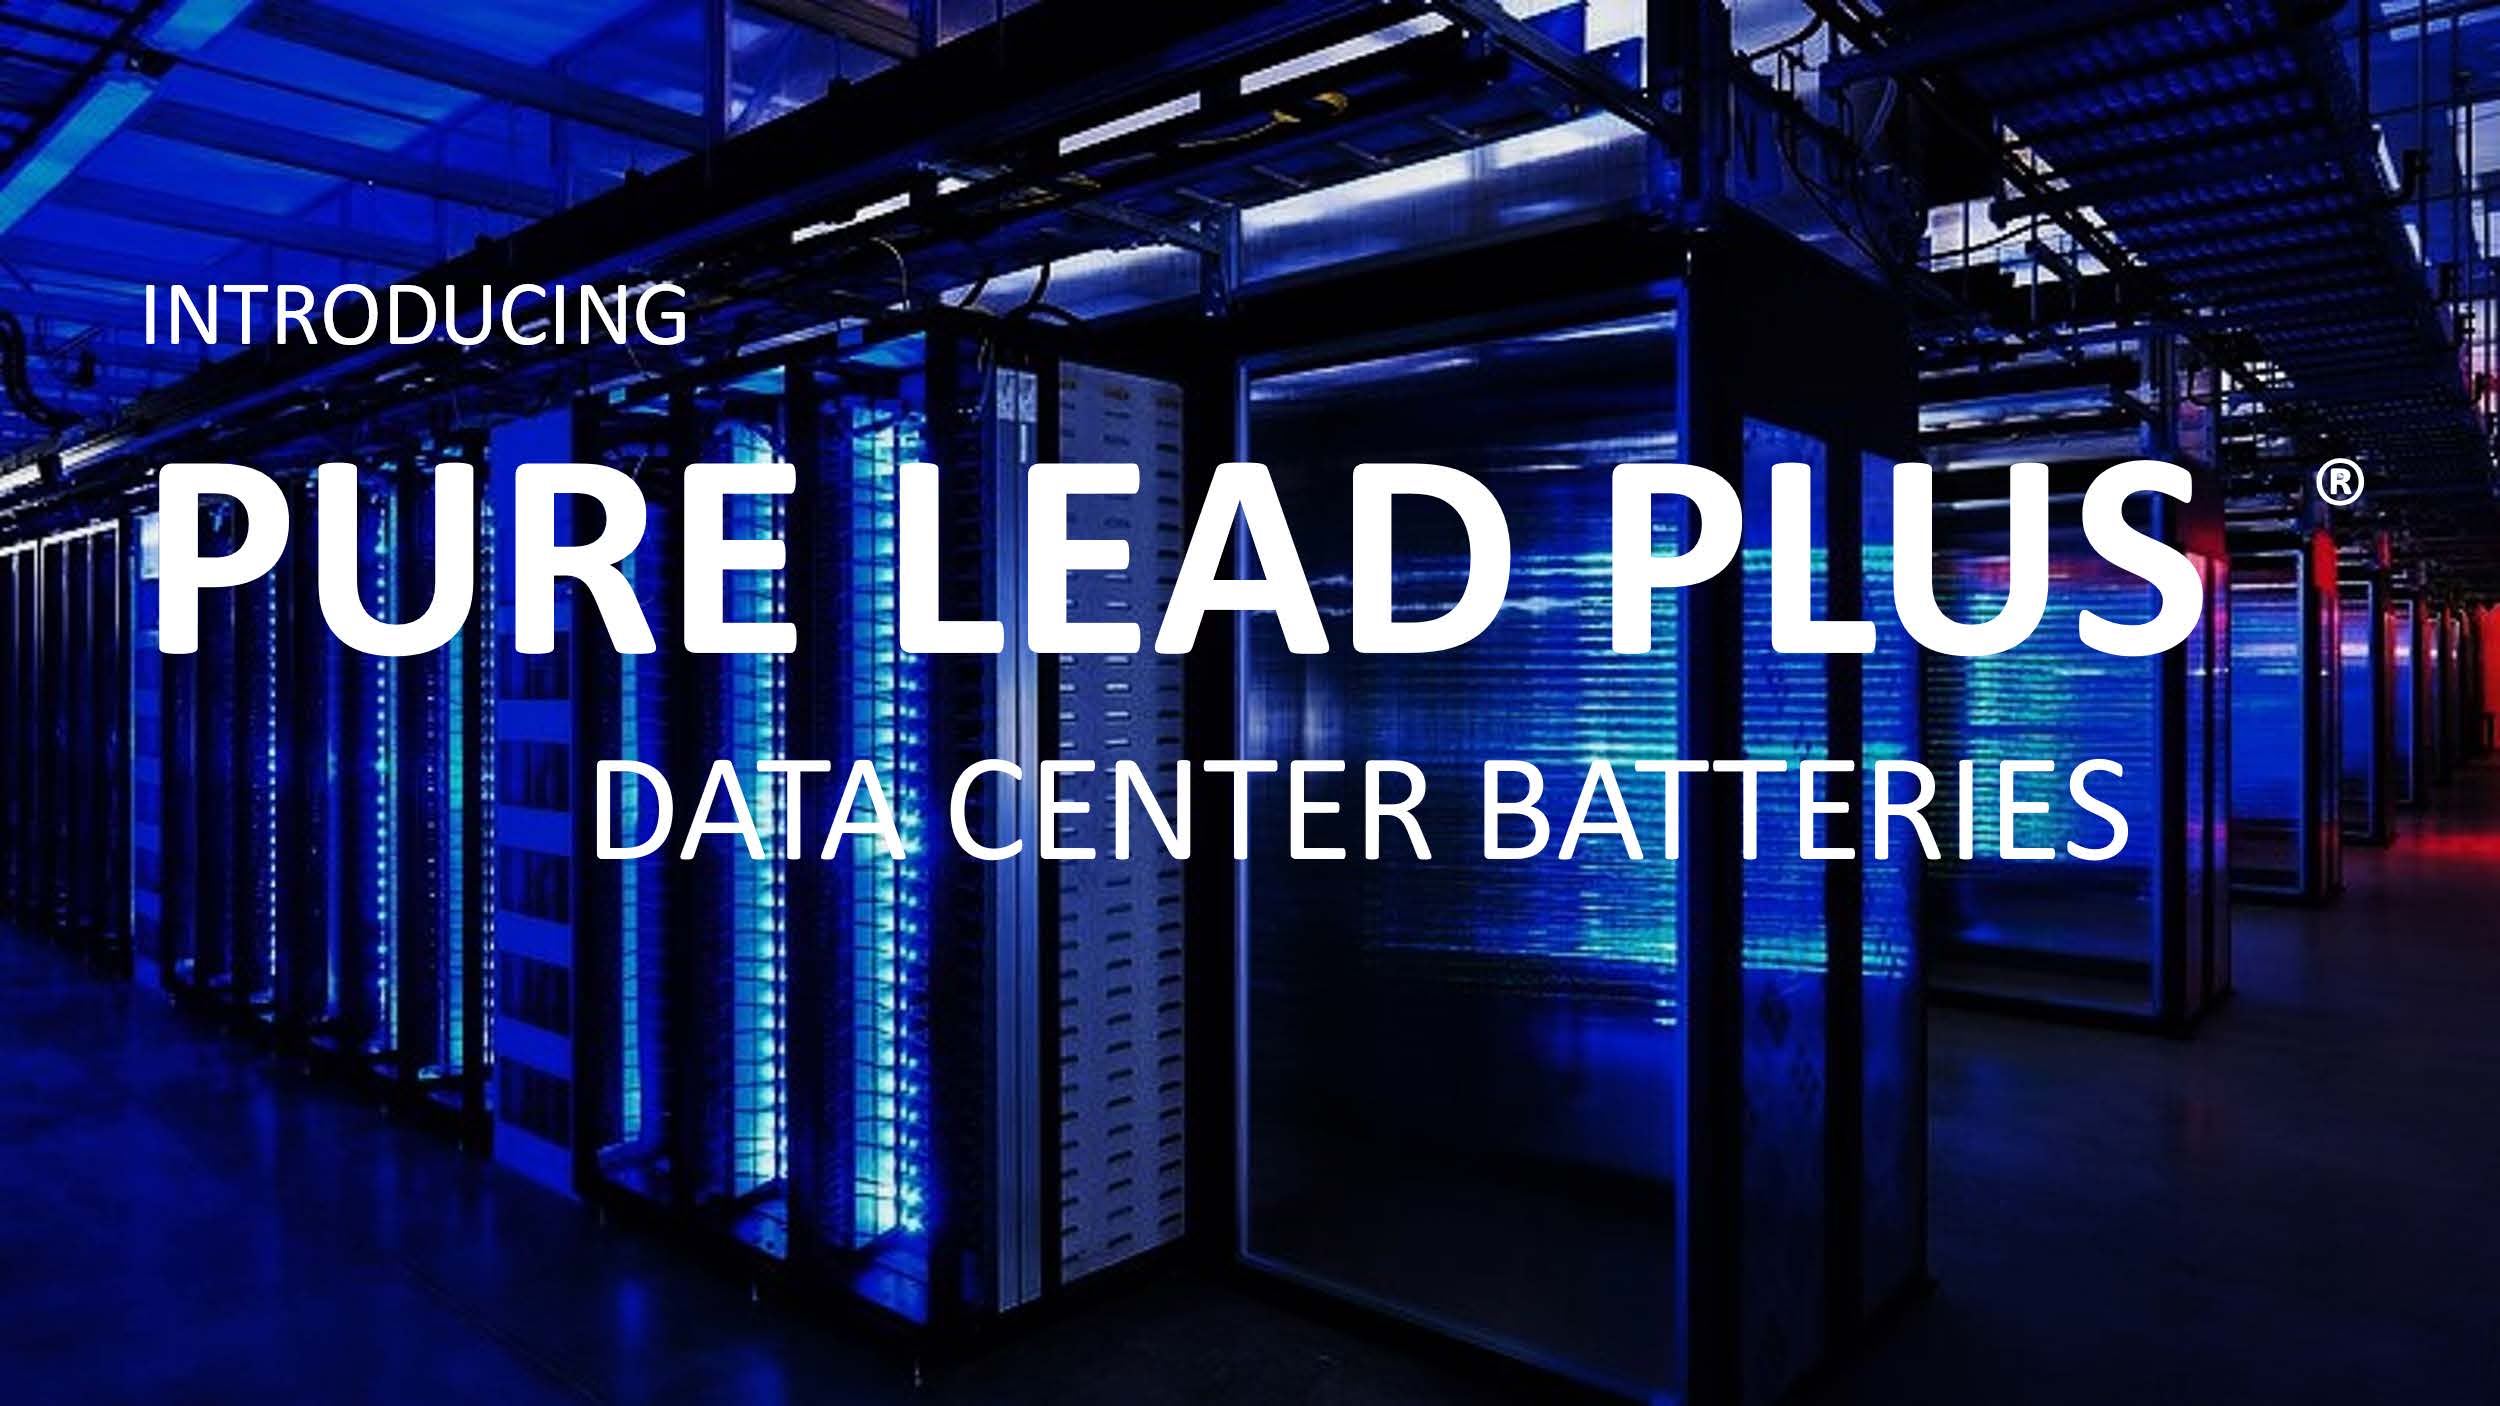 C&D Technologies' Pure Lead Plus UPS Batteries reduce costs and improve data center performance.